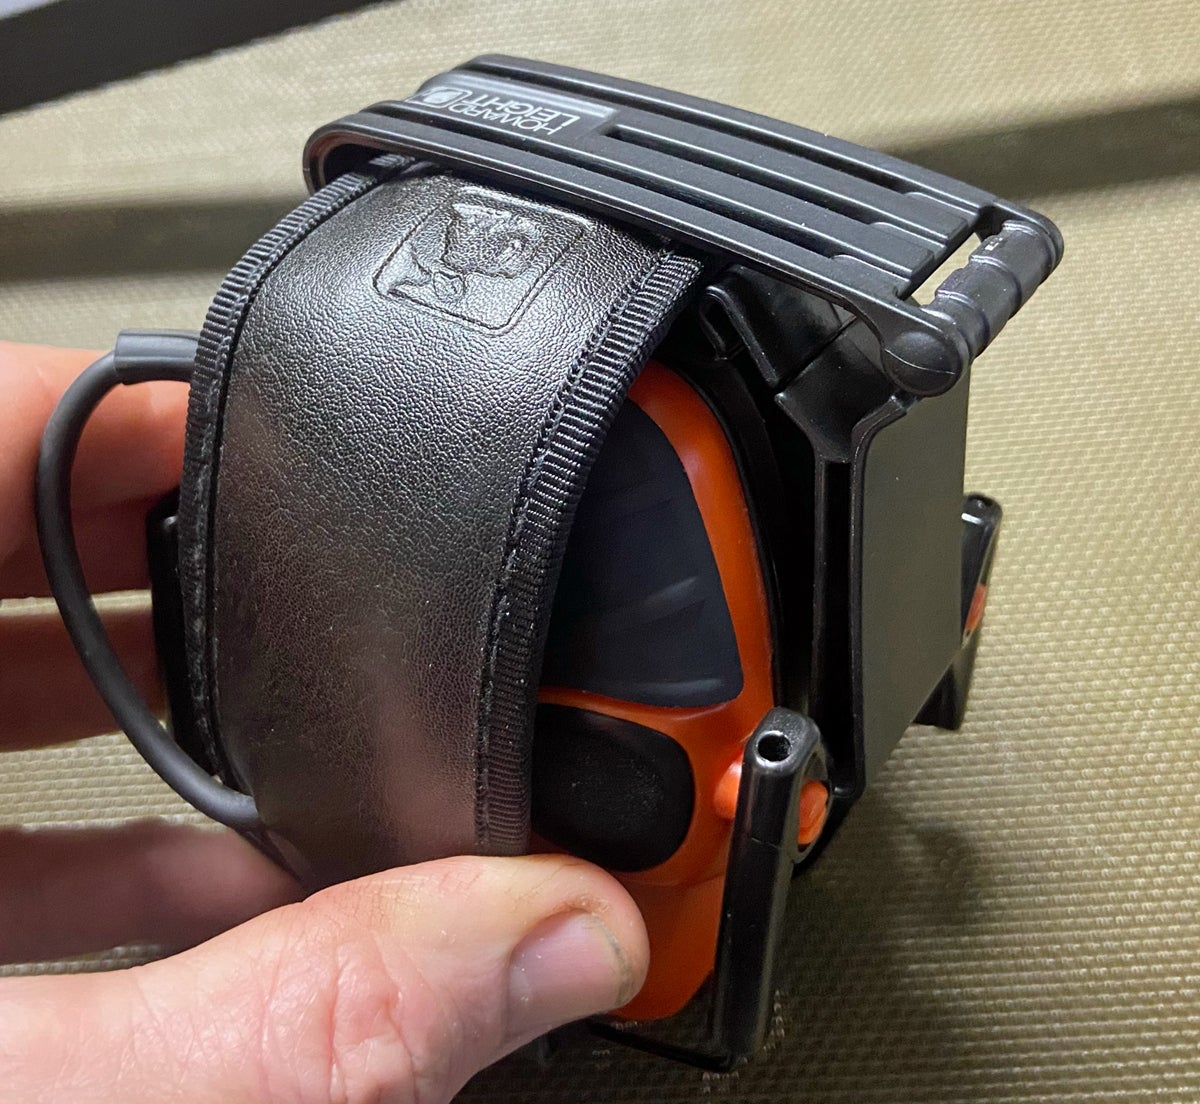 The clip folds out of the way for storing the headset (Photo © Russ Chastain)